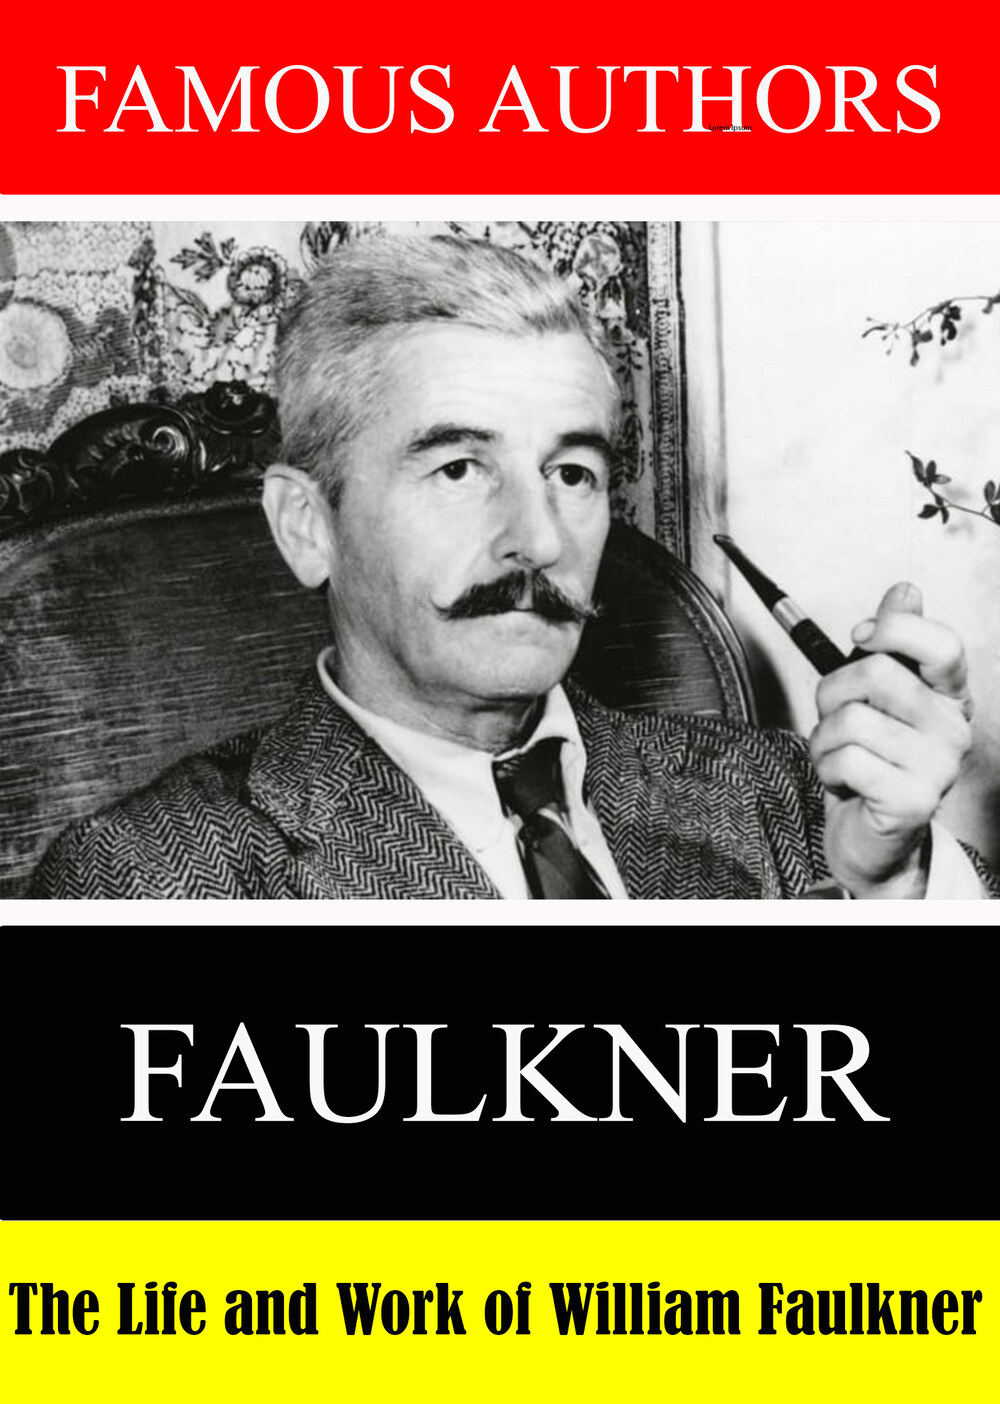 L7882 - Famous Authors: The Life and Work of William Faulkner